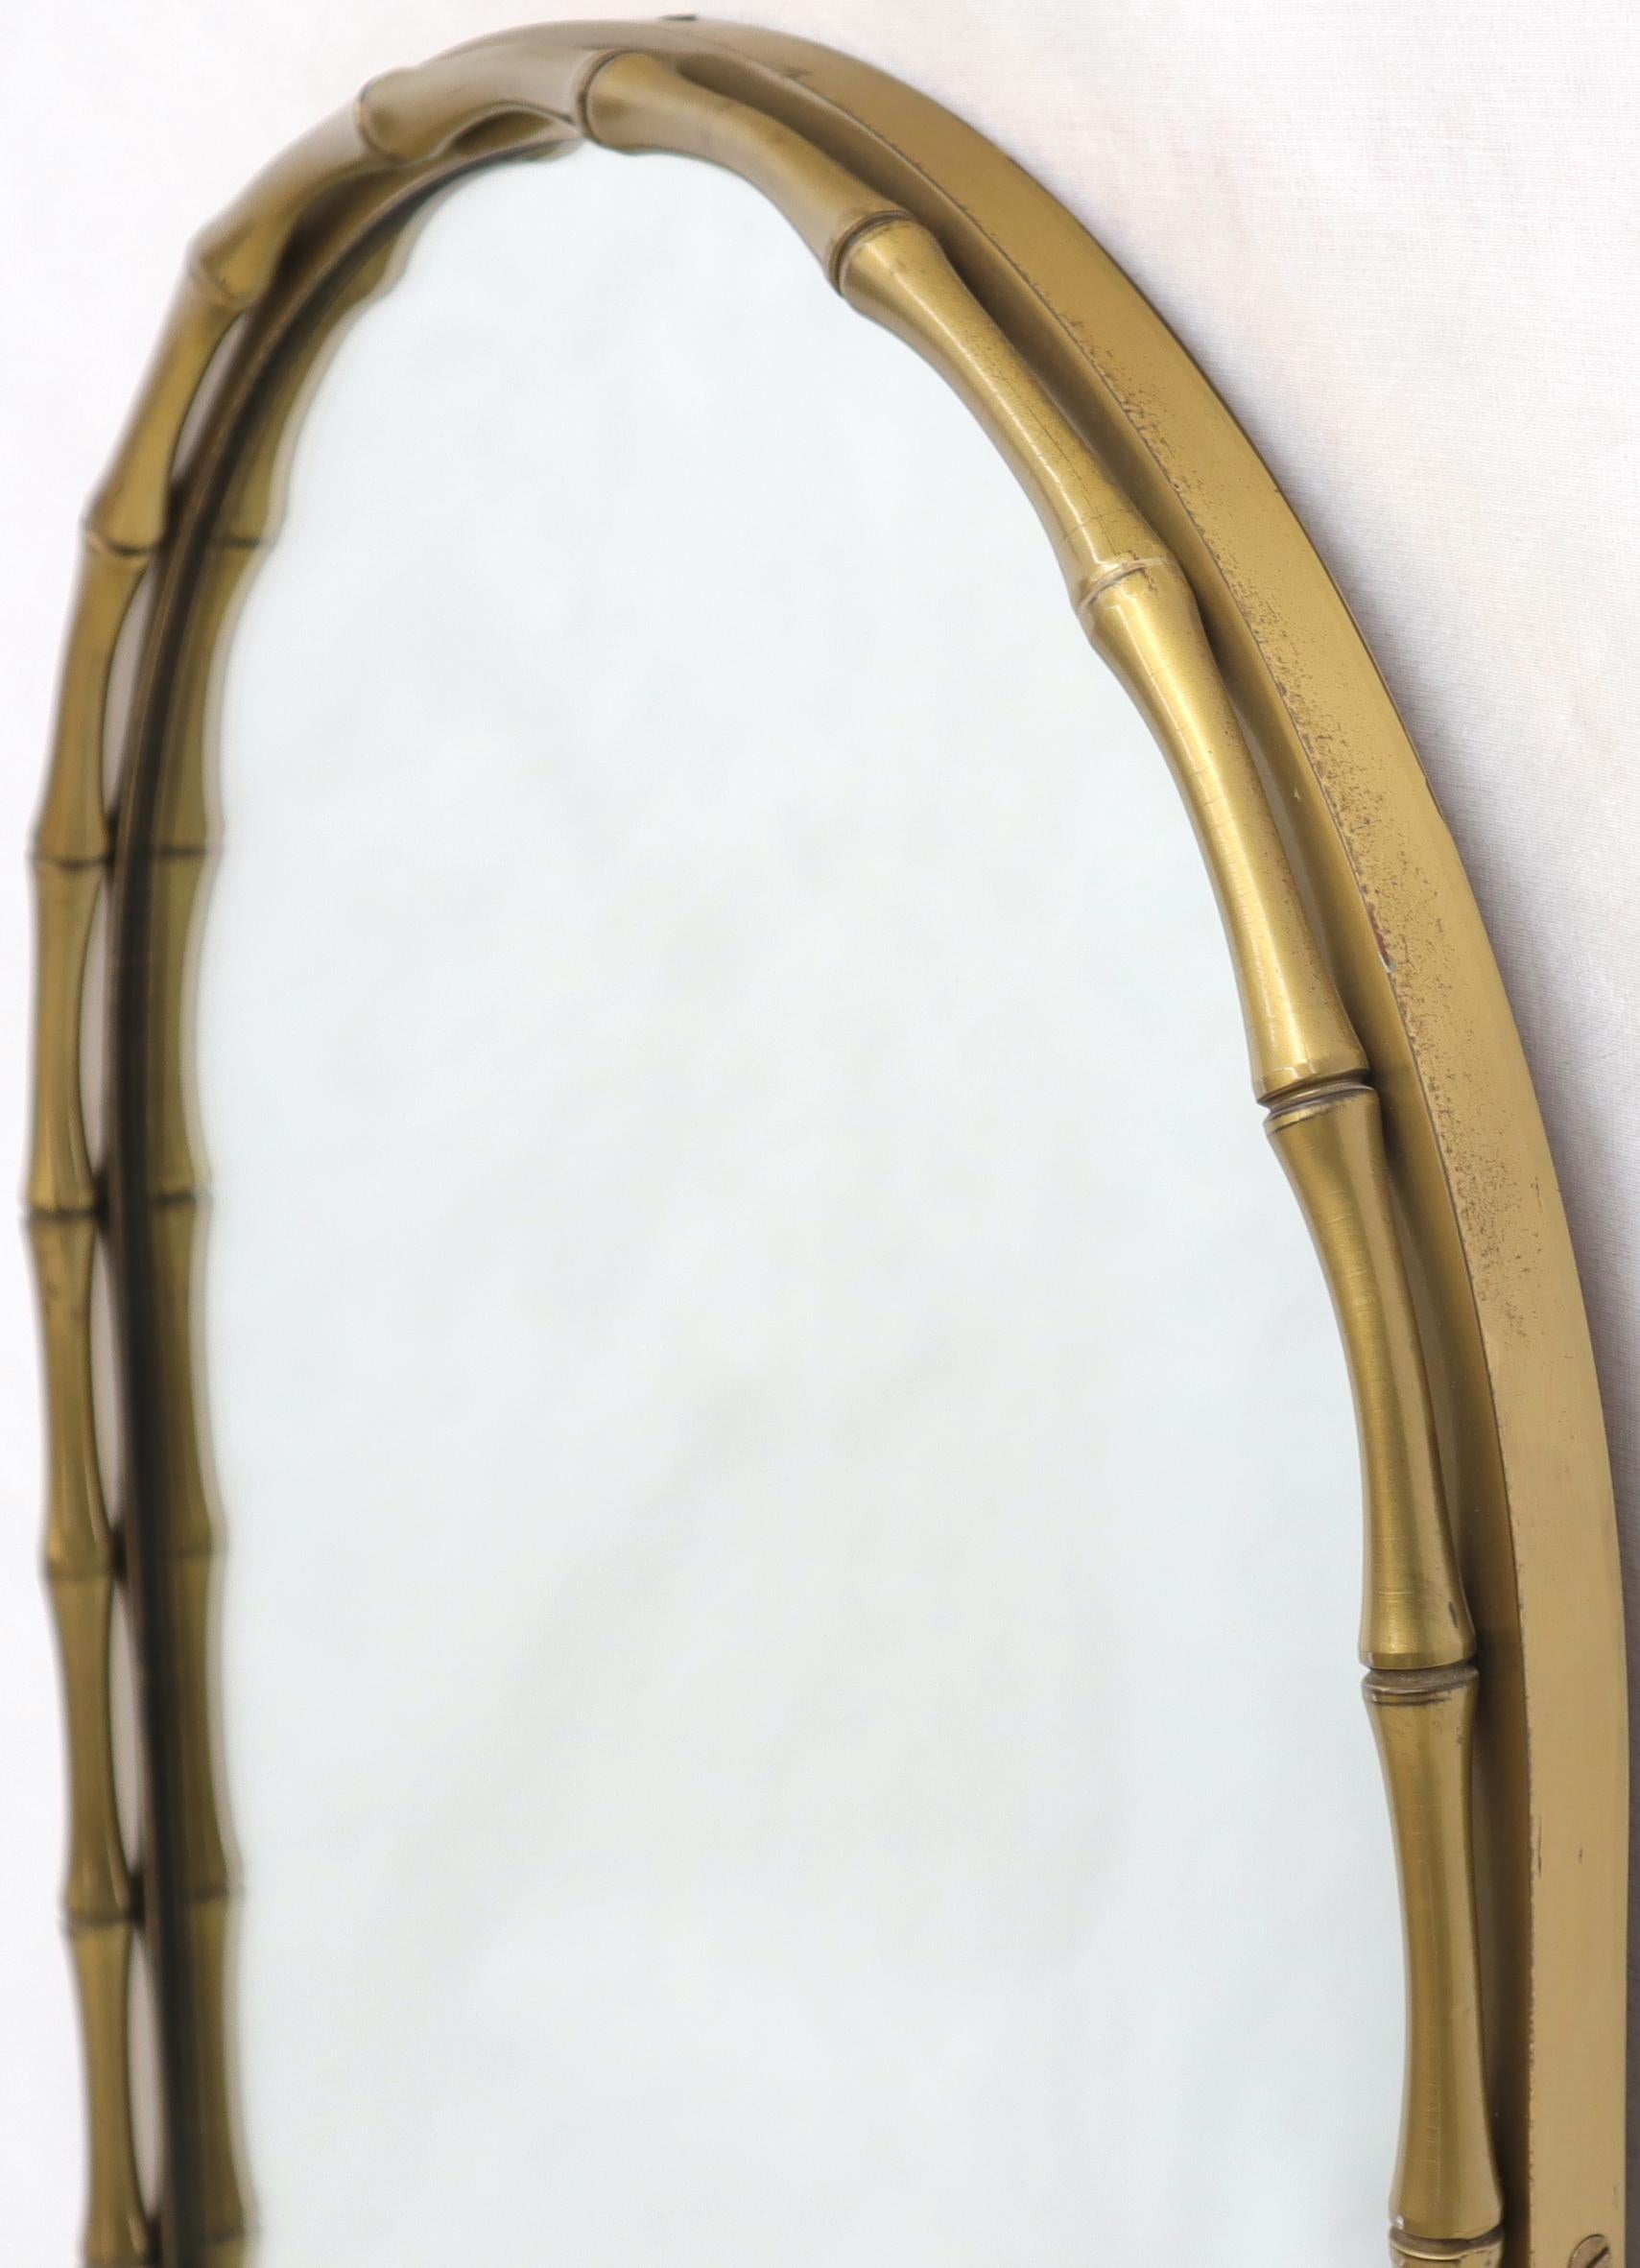 Dome Shape Metal Frame Faux Bamboo Mirror In Excellent Condition For Sale In Rockaway, NJ